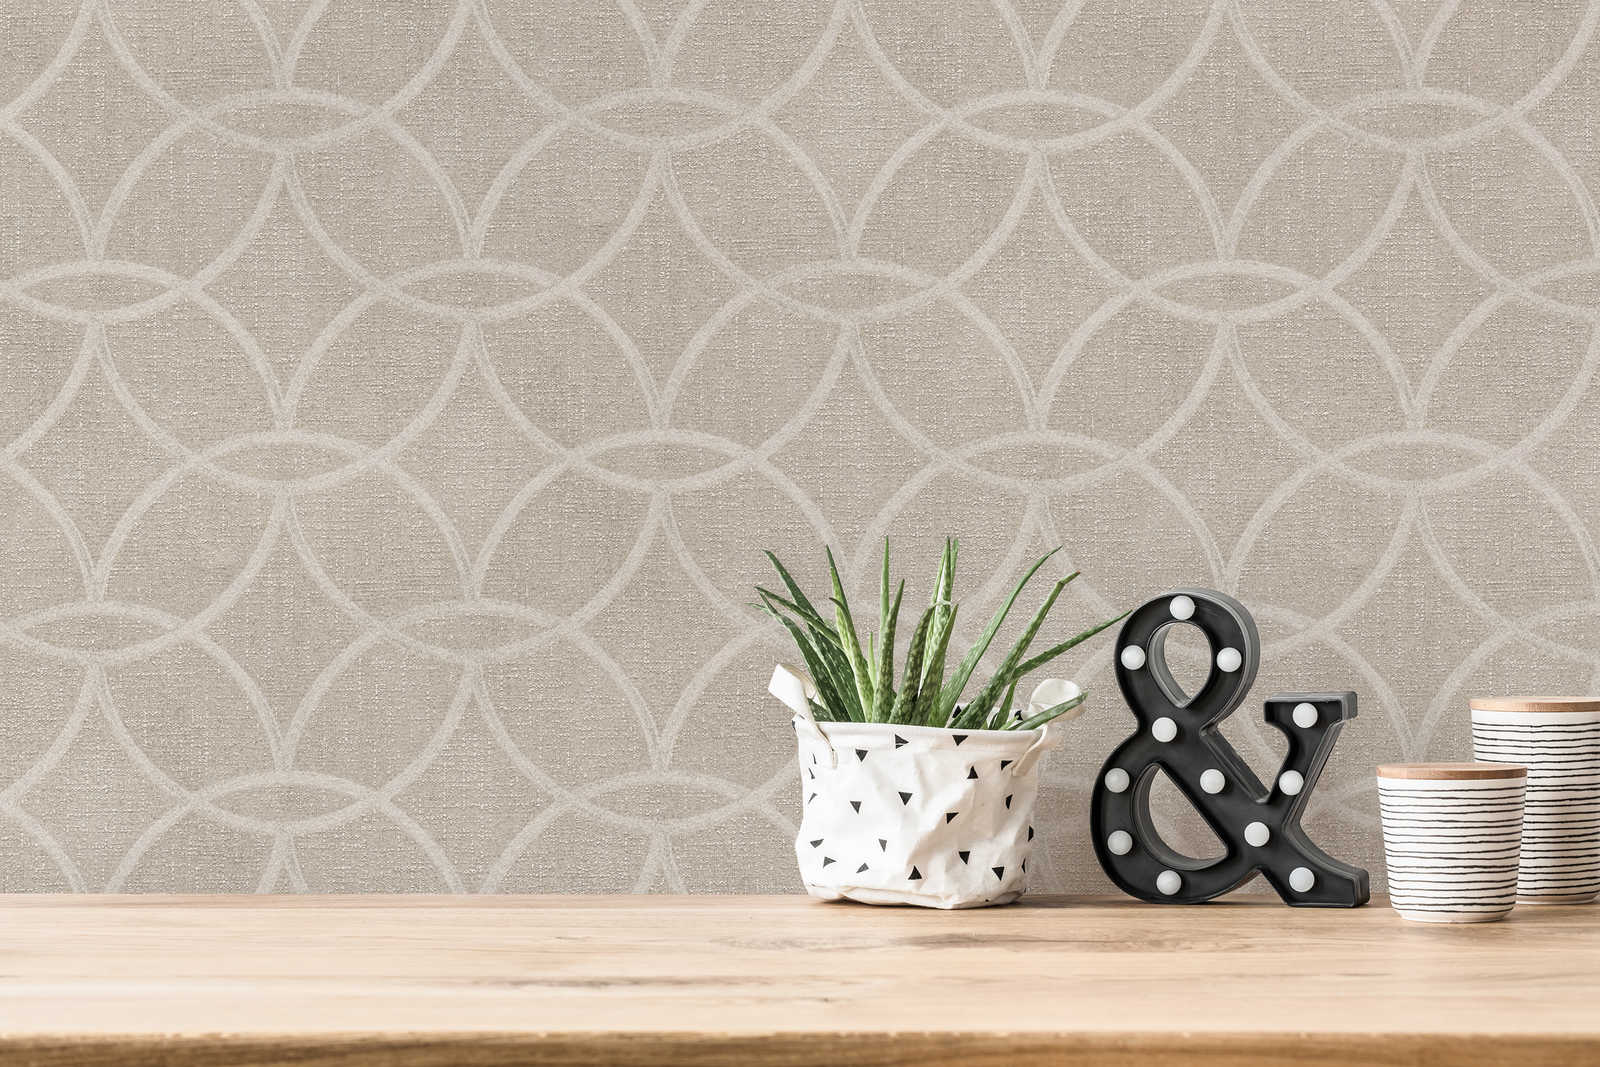             Graphic pattern wallpaper with metallic colour & shimmer effect - grey
        